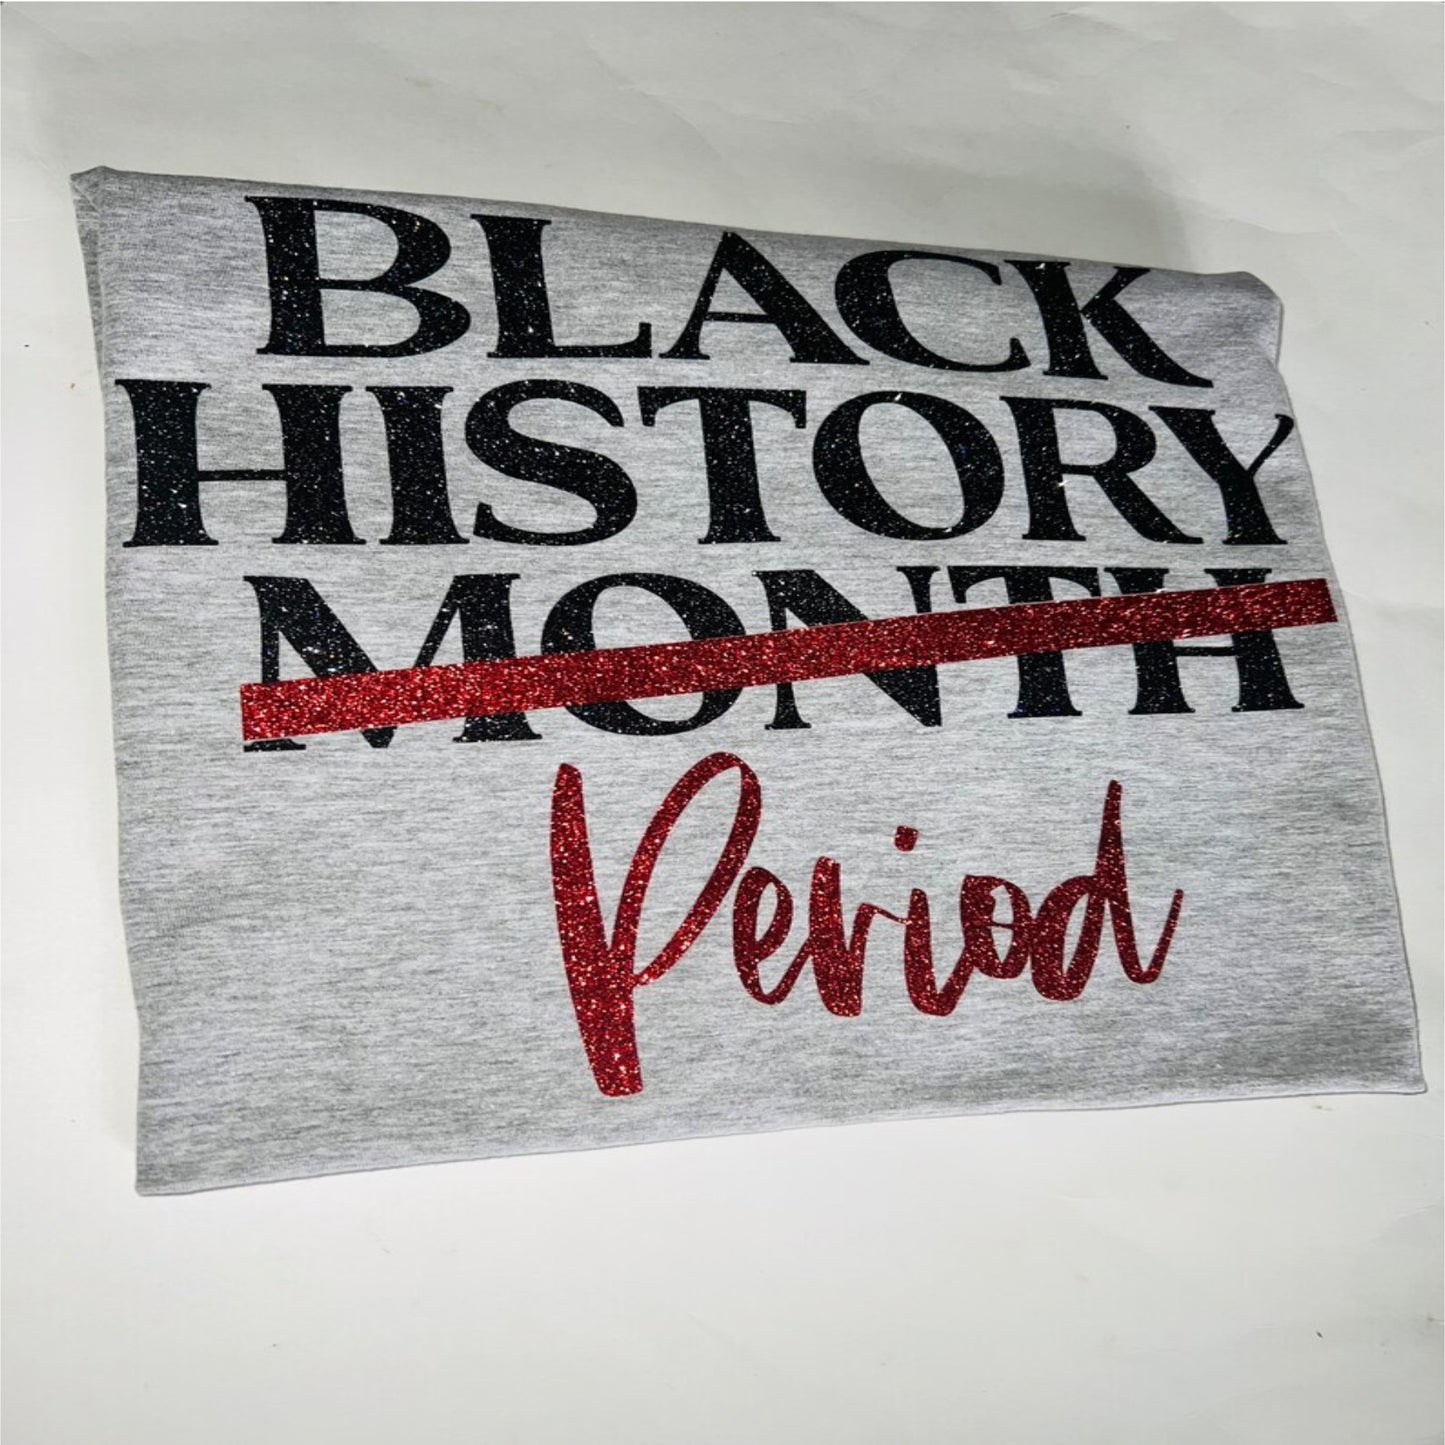 BLACK HISTORY PERIOD SHIRT   Message us for additional colors or customizations. Contact us form at the bottom of the website